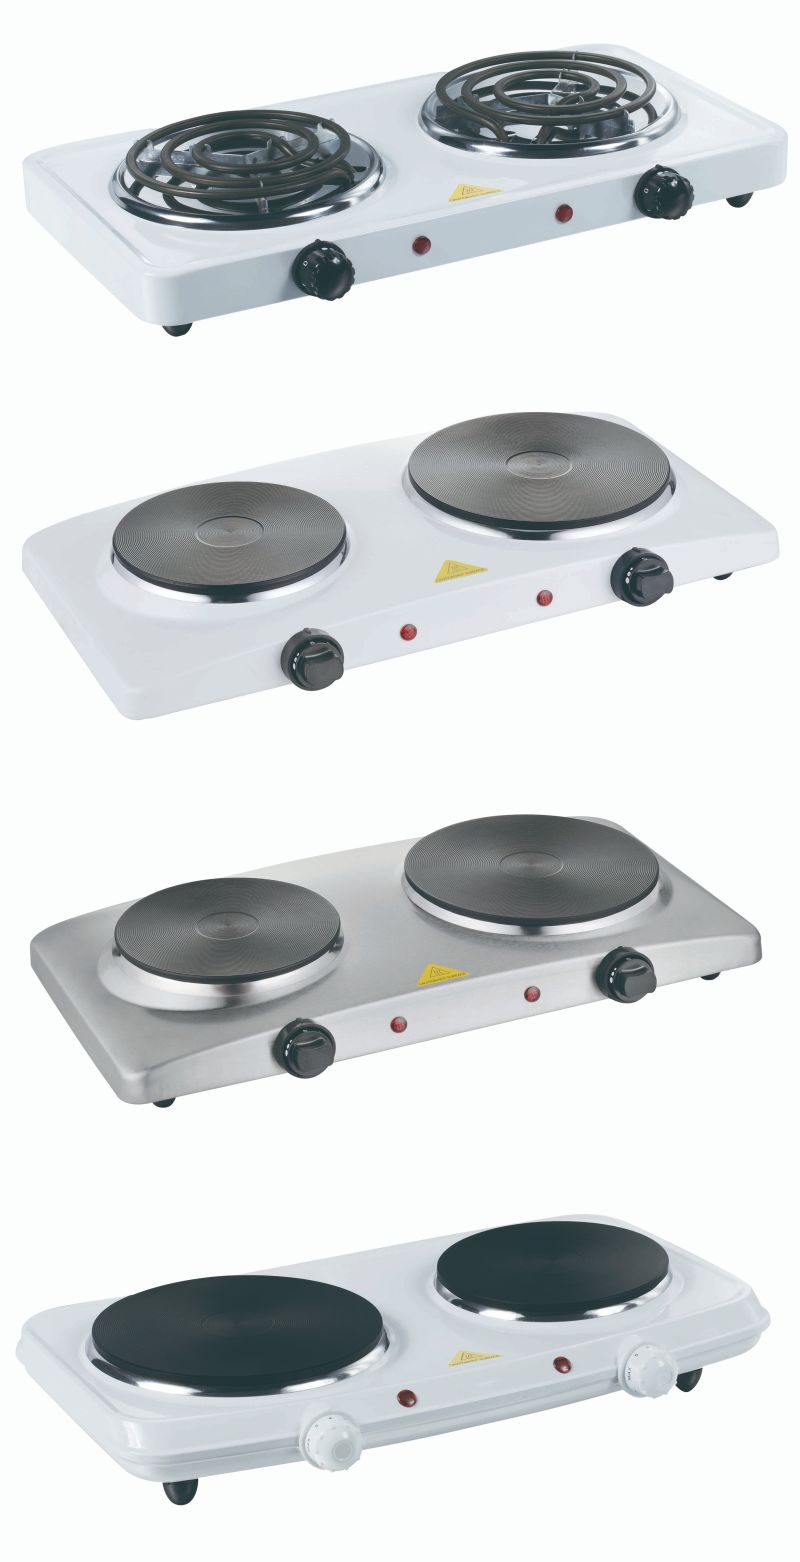 Coil Stainless Steel 2 Burner Electric Stove Cooking Hot Plate